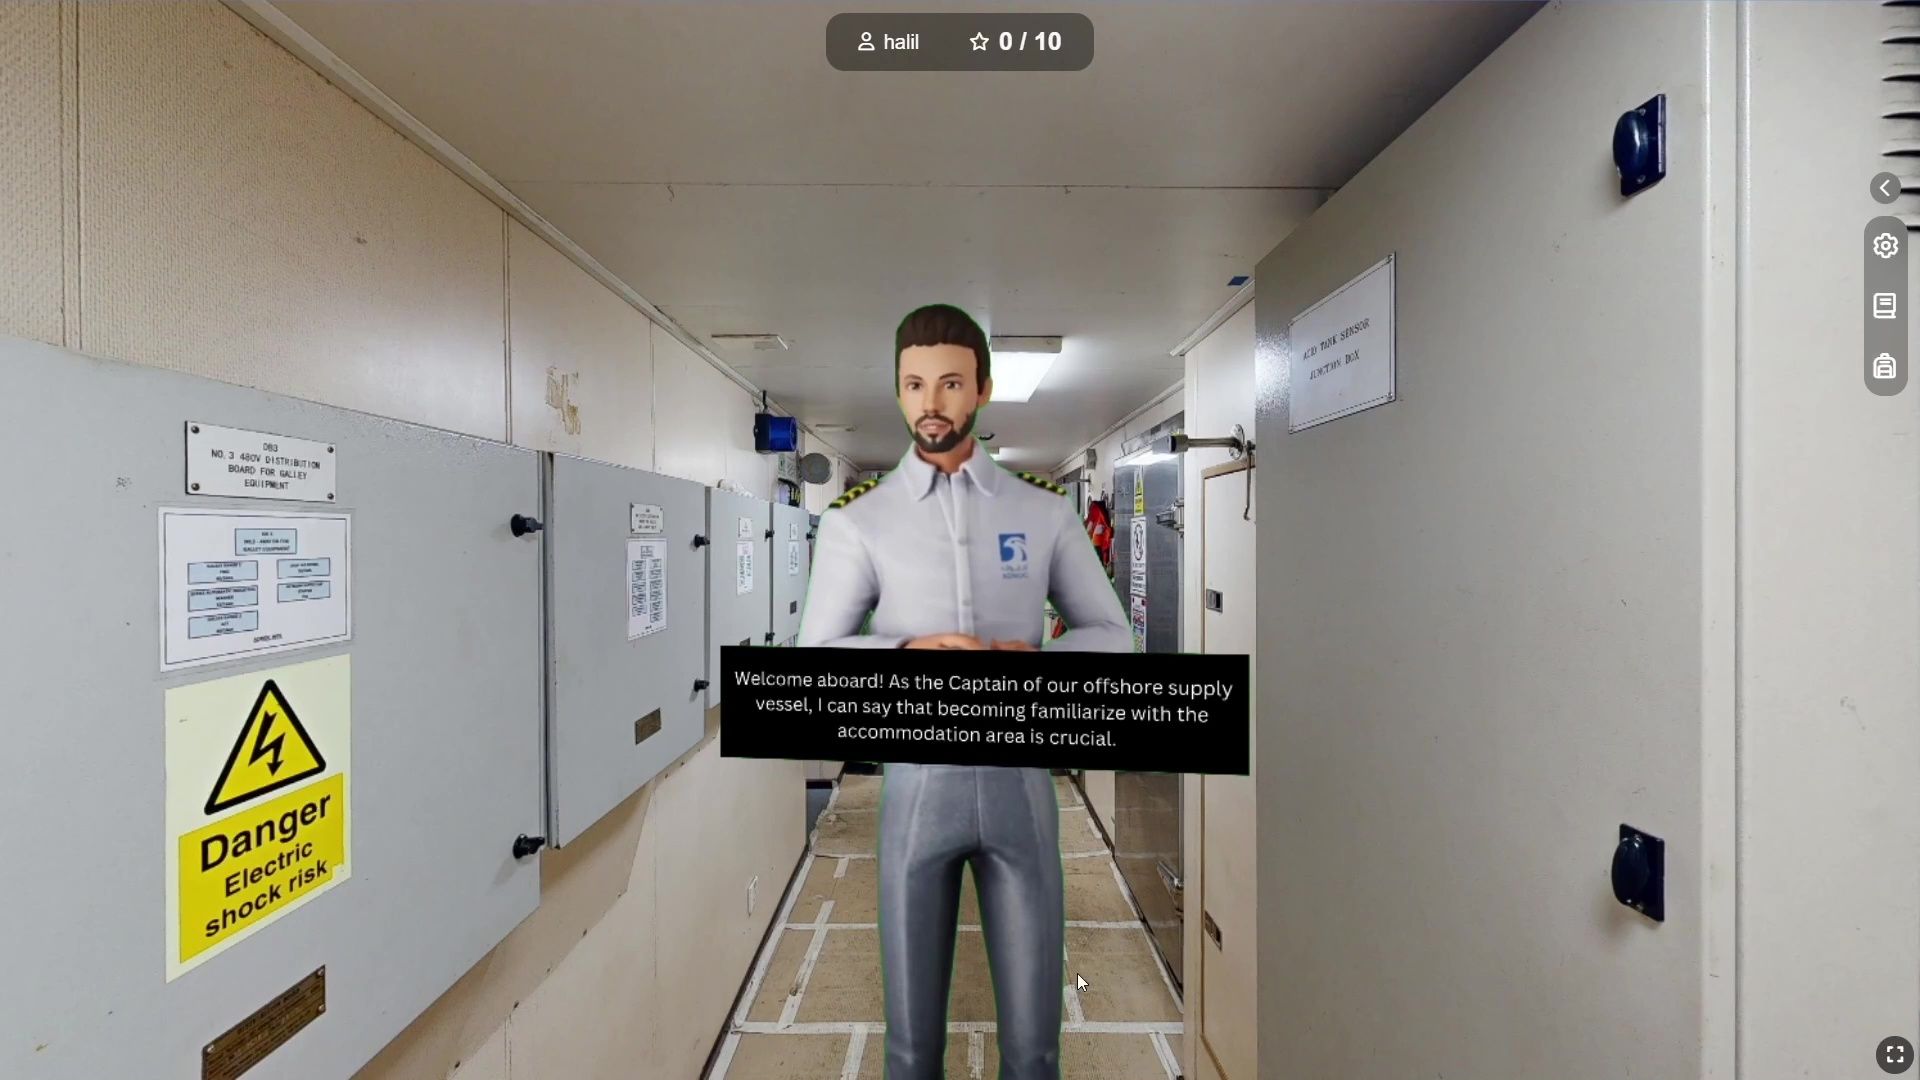 Virtual Captain telling digital twin technology and course